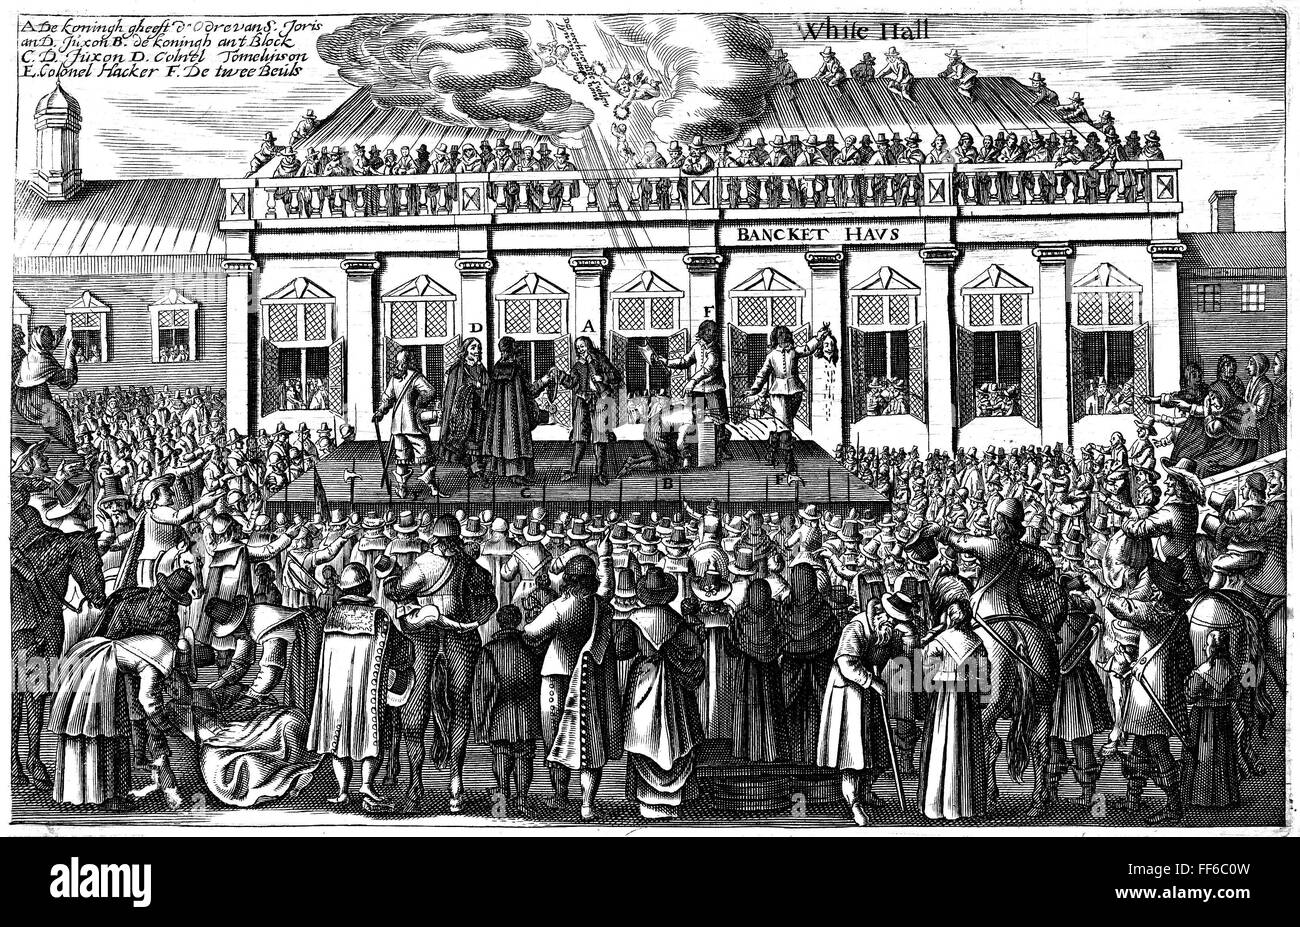 EXECUTION OF CHARLES I. /nThe execution of King Charles I of England at Whitehall, London, 30 January 1649. Contemporary Dutch copper engraving. Stock Photo